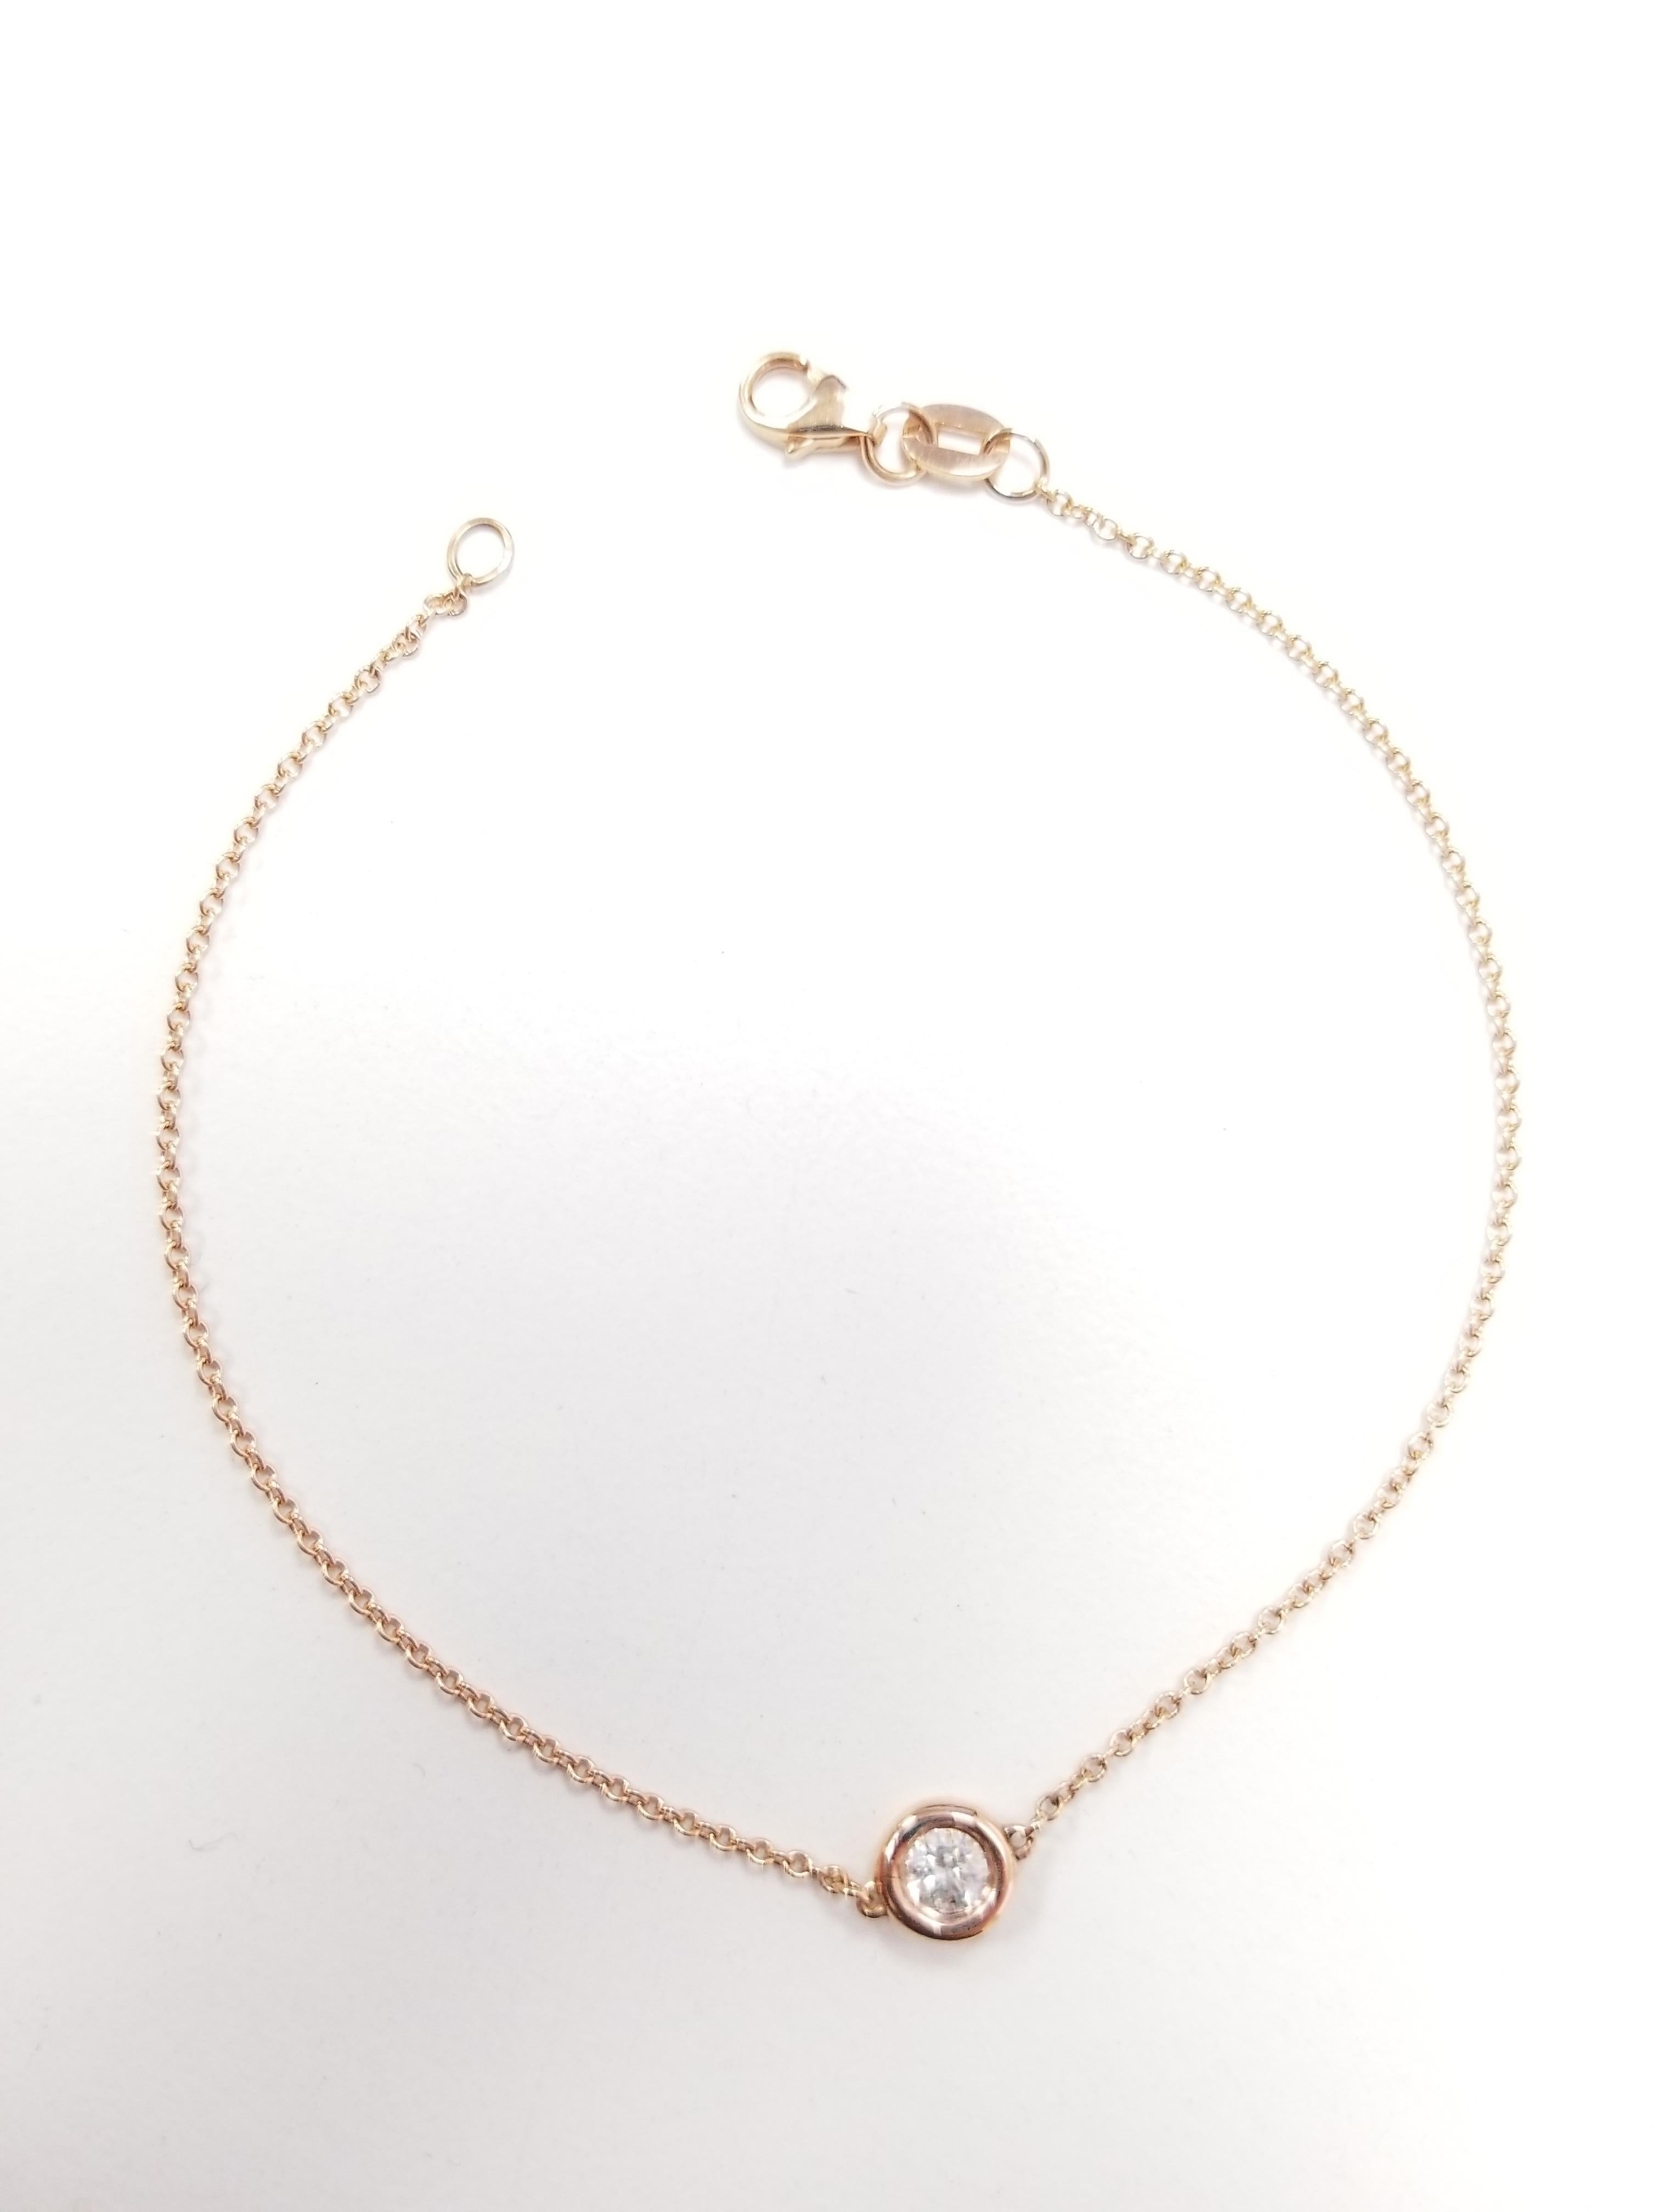 A stunning and classic bracelet perfect for everyday wear combined or simply on it's own. 0.42 cttw White Diamond is handset in an 14k bezel and attached to a dainty chain with and clasp from 7 inch.  The bracelet is hand polished with a shiny